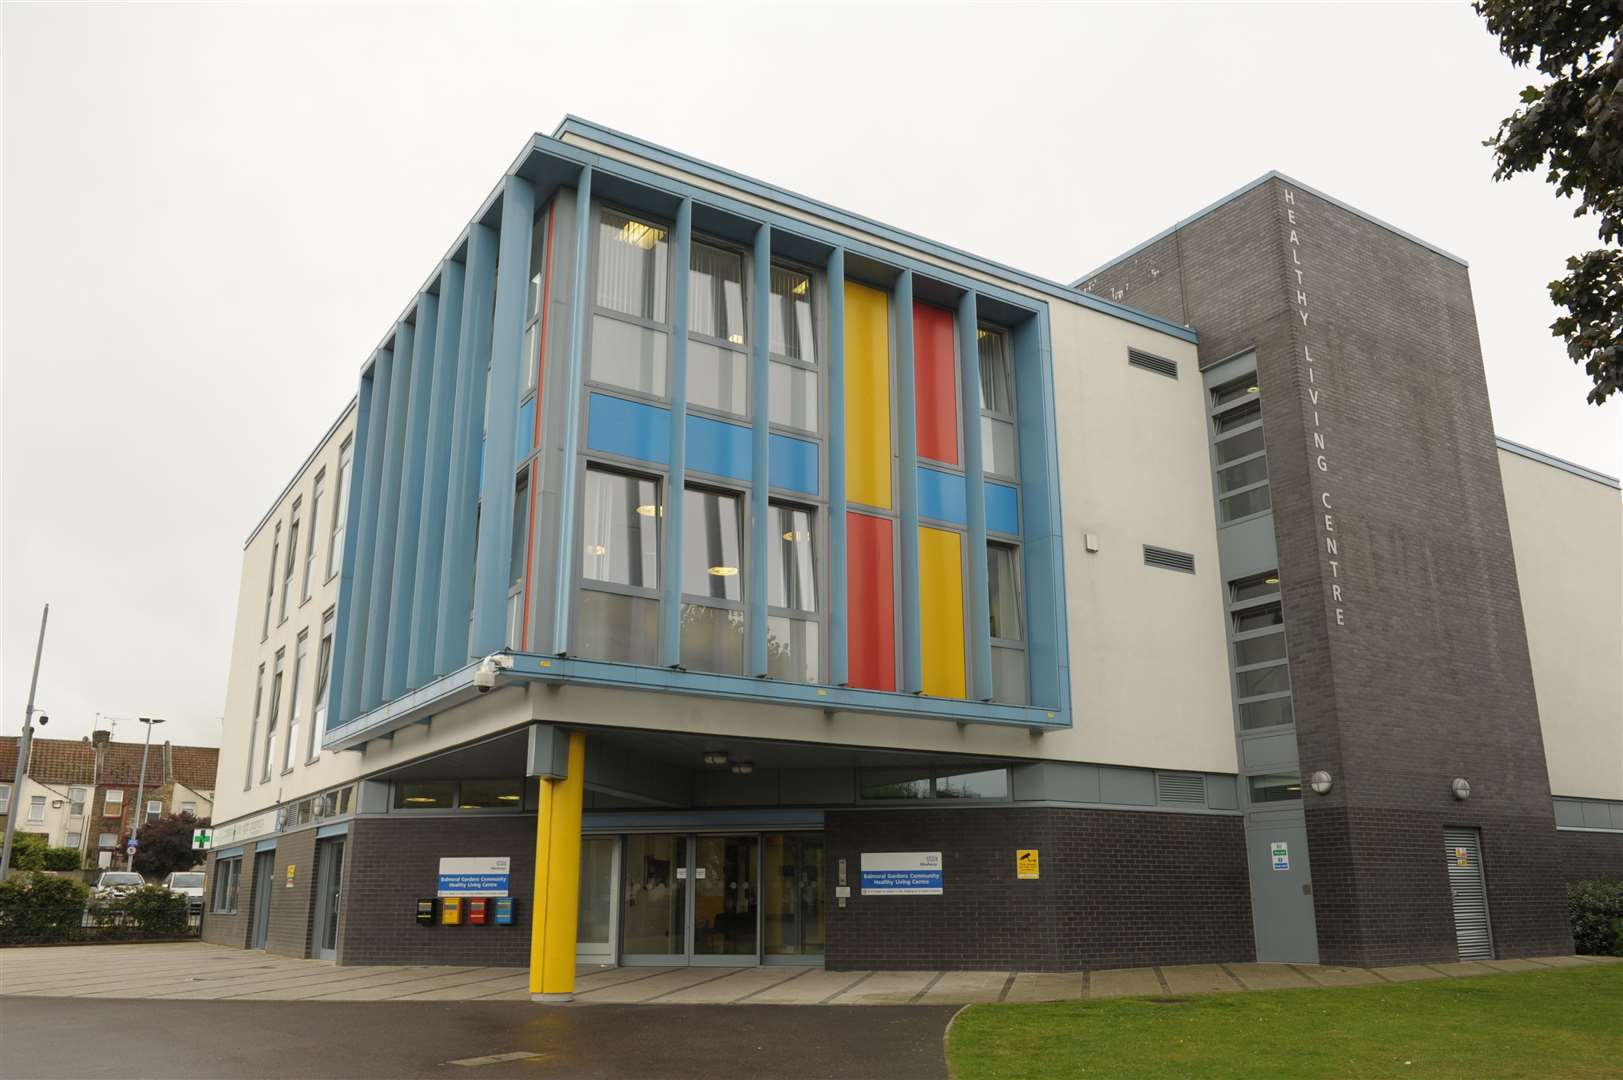 The Balmoral Gardens clinic in Gillingham was home to the yellow surgery and green surgery run by two separate practices managed by DMC